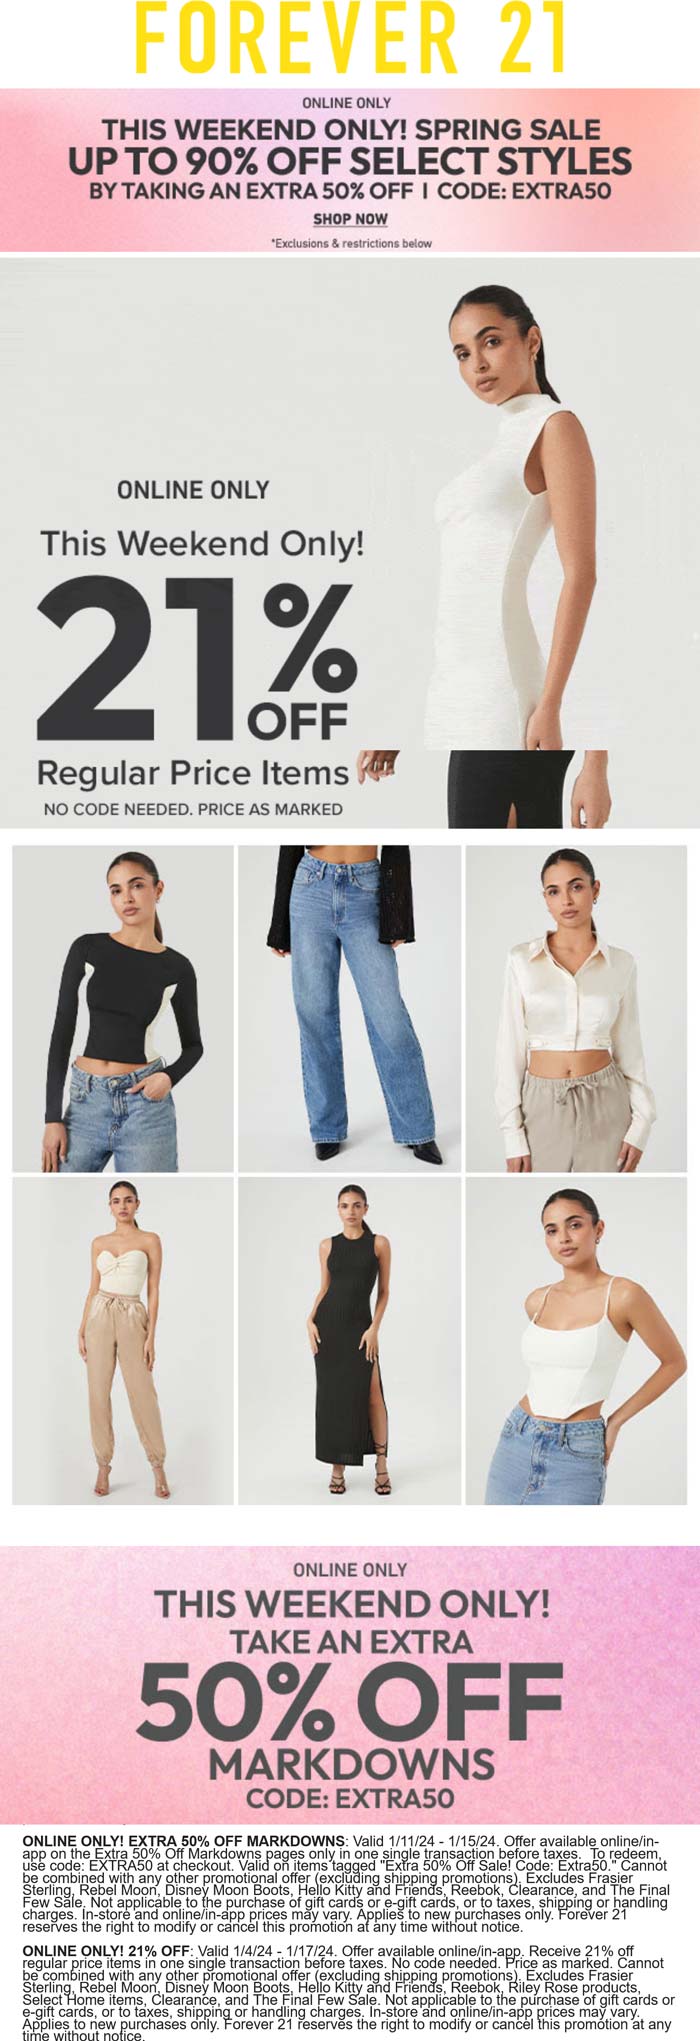 Forever 21 stores Coupon  Extra 50% off sale items & 21% regular online at Forever 21 #forever21 